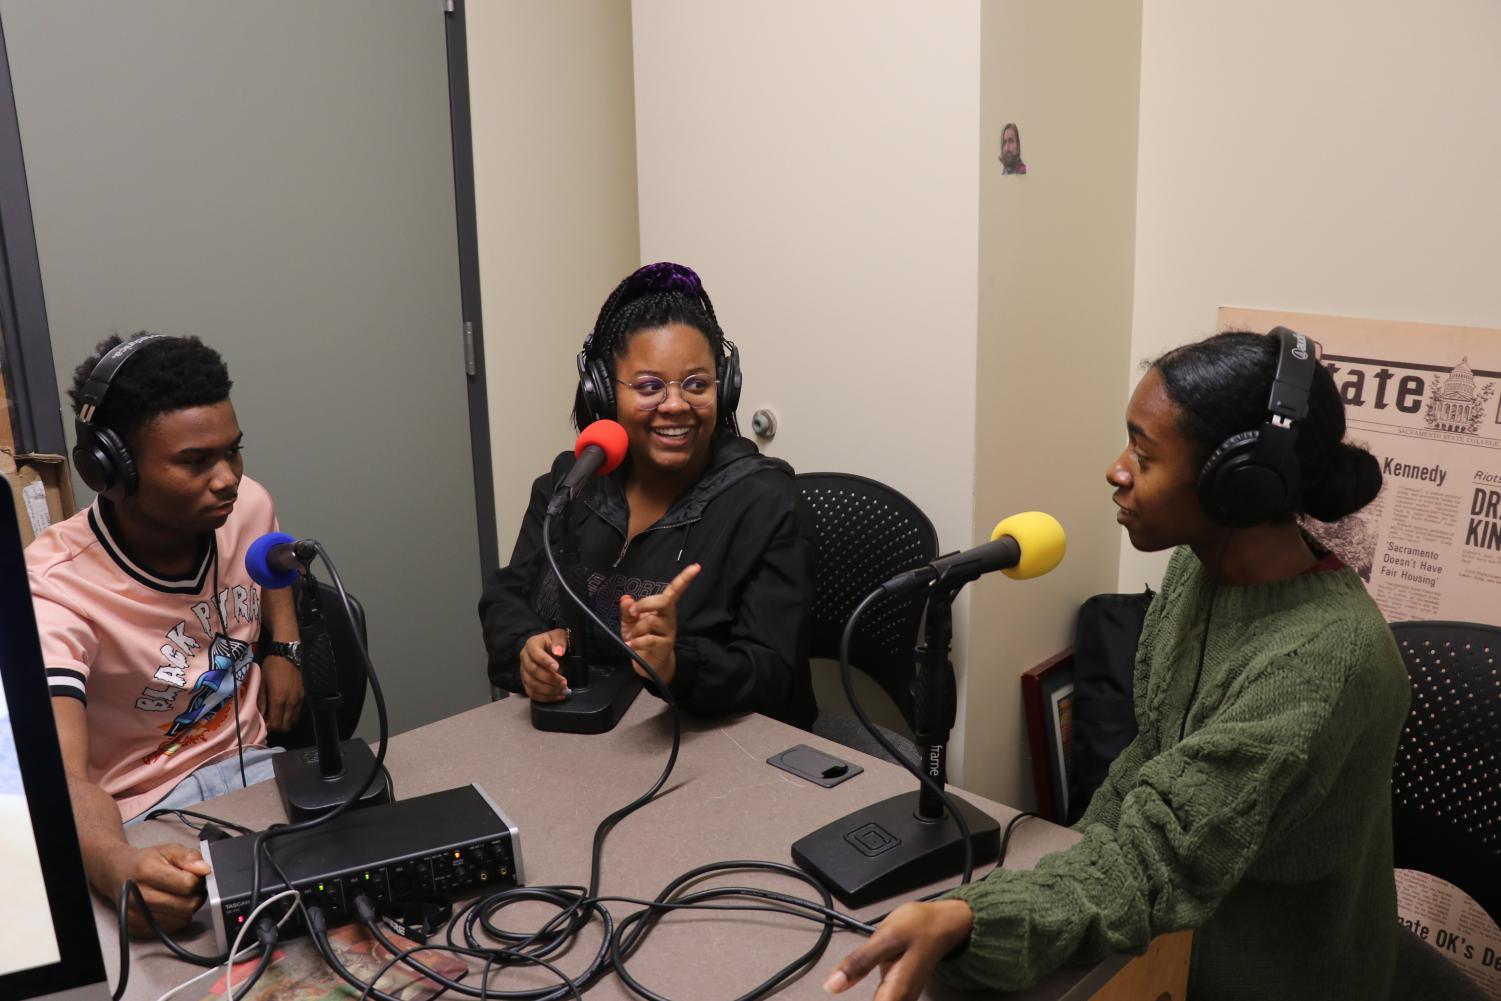 NEWS PODCAST: The Black student experience at Sac State - The State Hornet